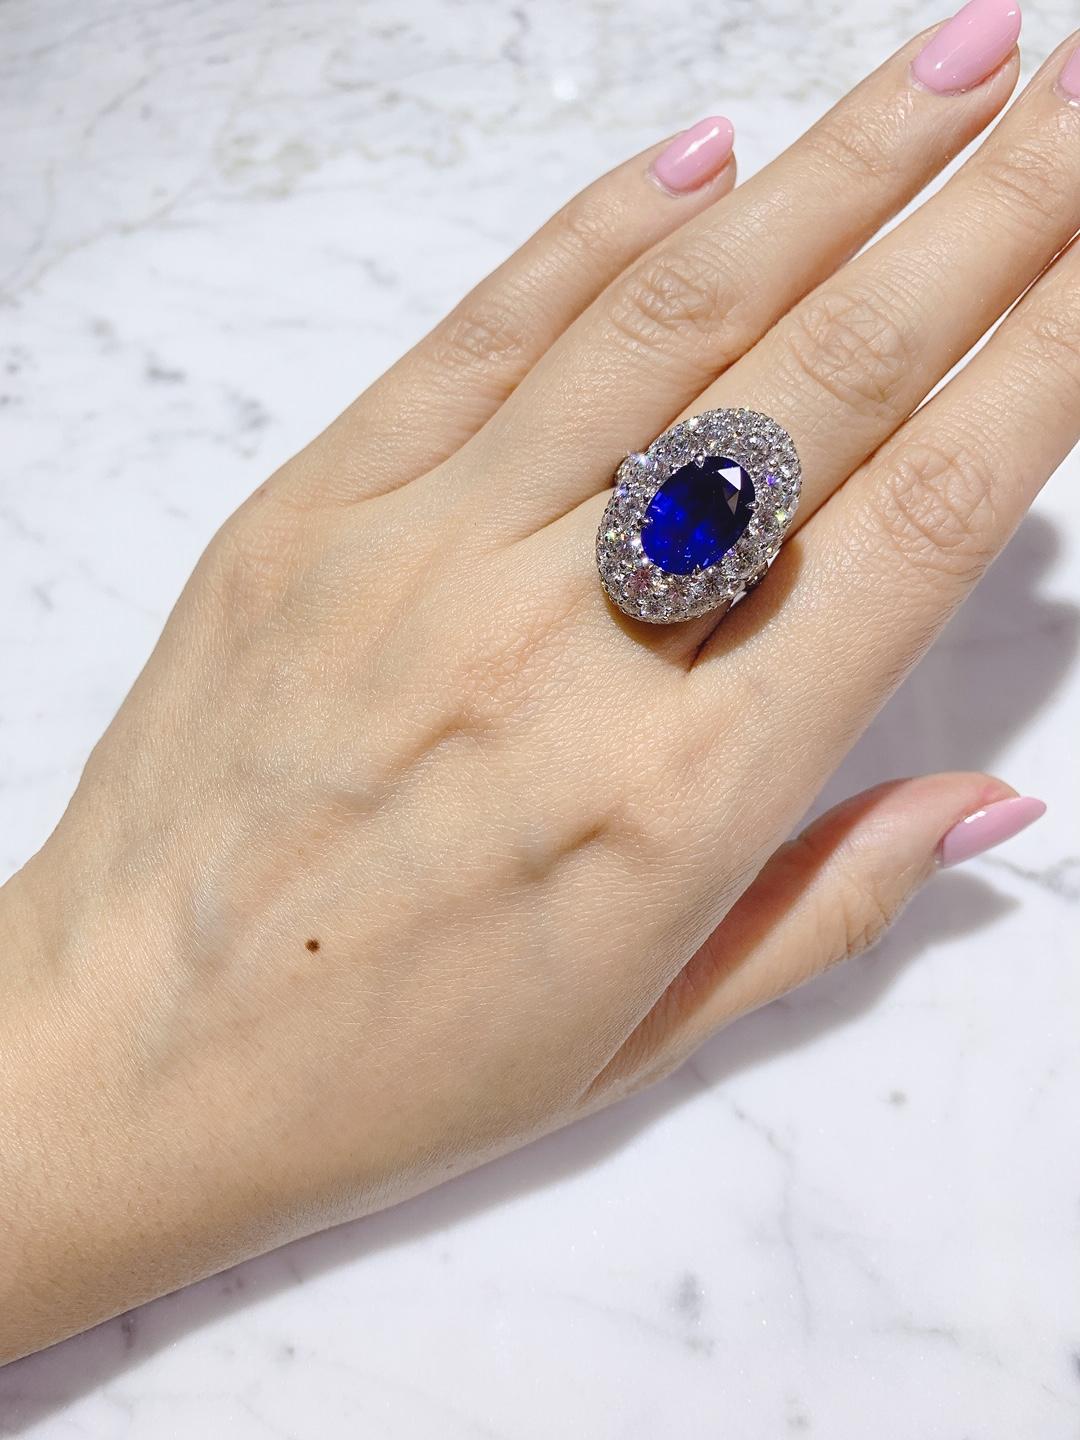 GRS Certified 6.24 Carat Ceylon Blue Sapphire Ring 'Heated' For Sale 6